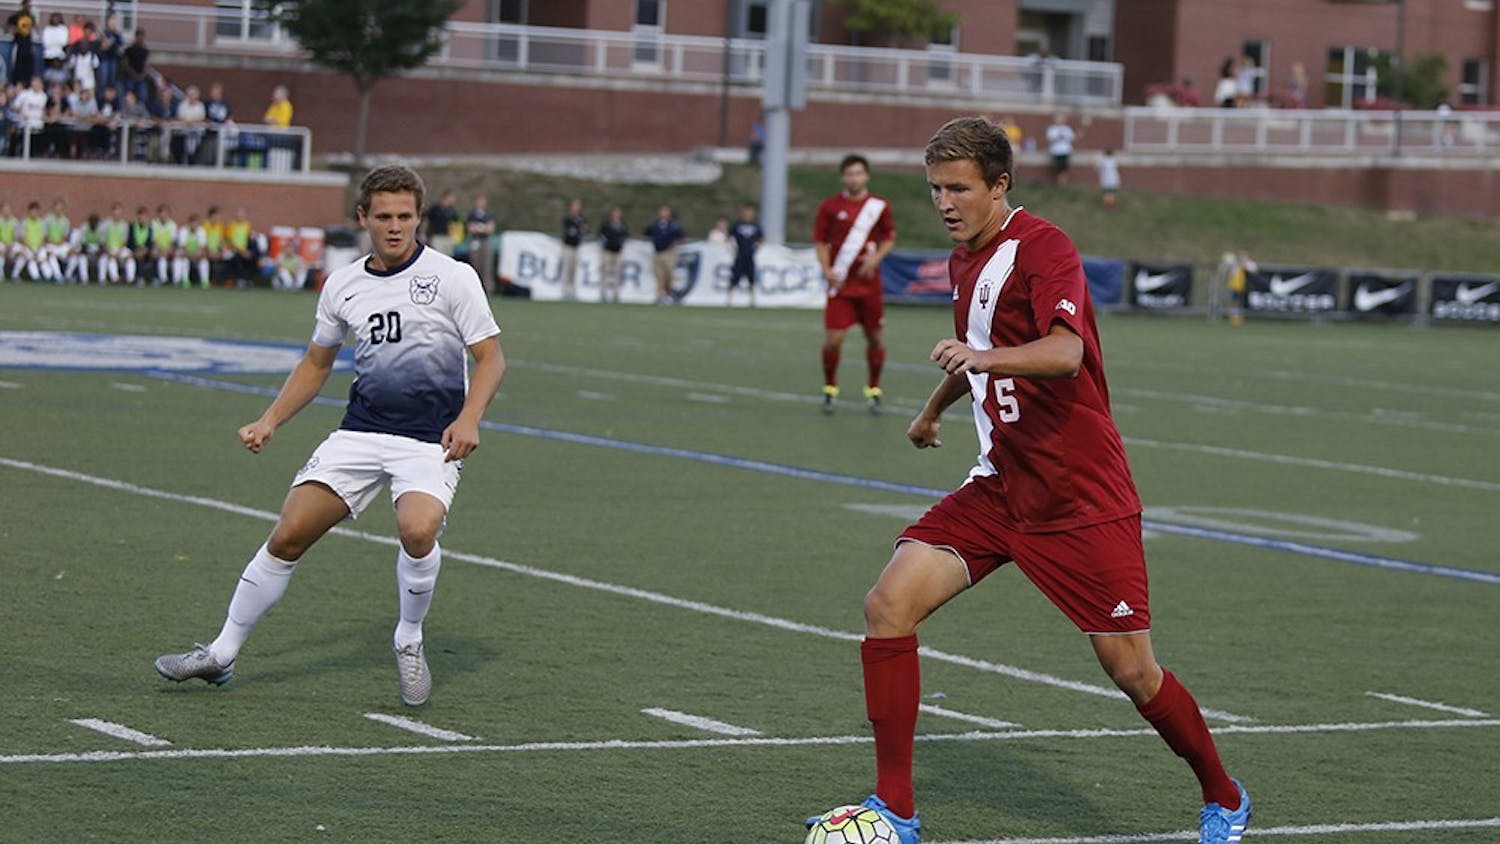 Sophomore defender Grant Lilard dribbles the ball during IU's game against Bulter on Wednesday at the Butler Bowl. 